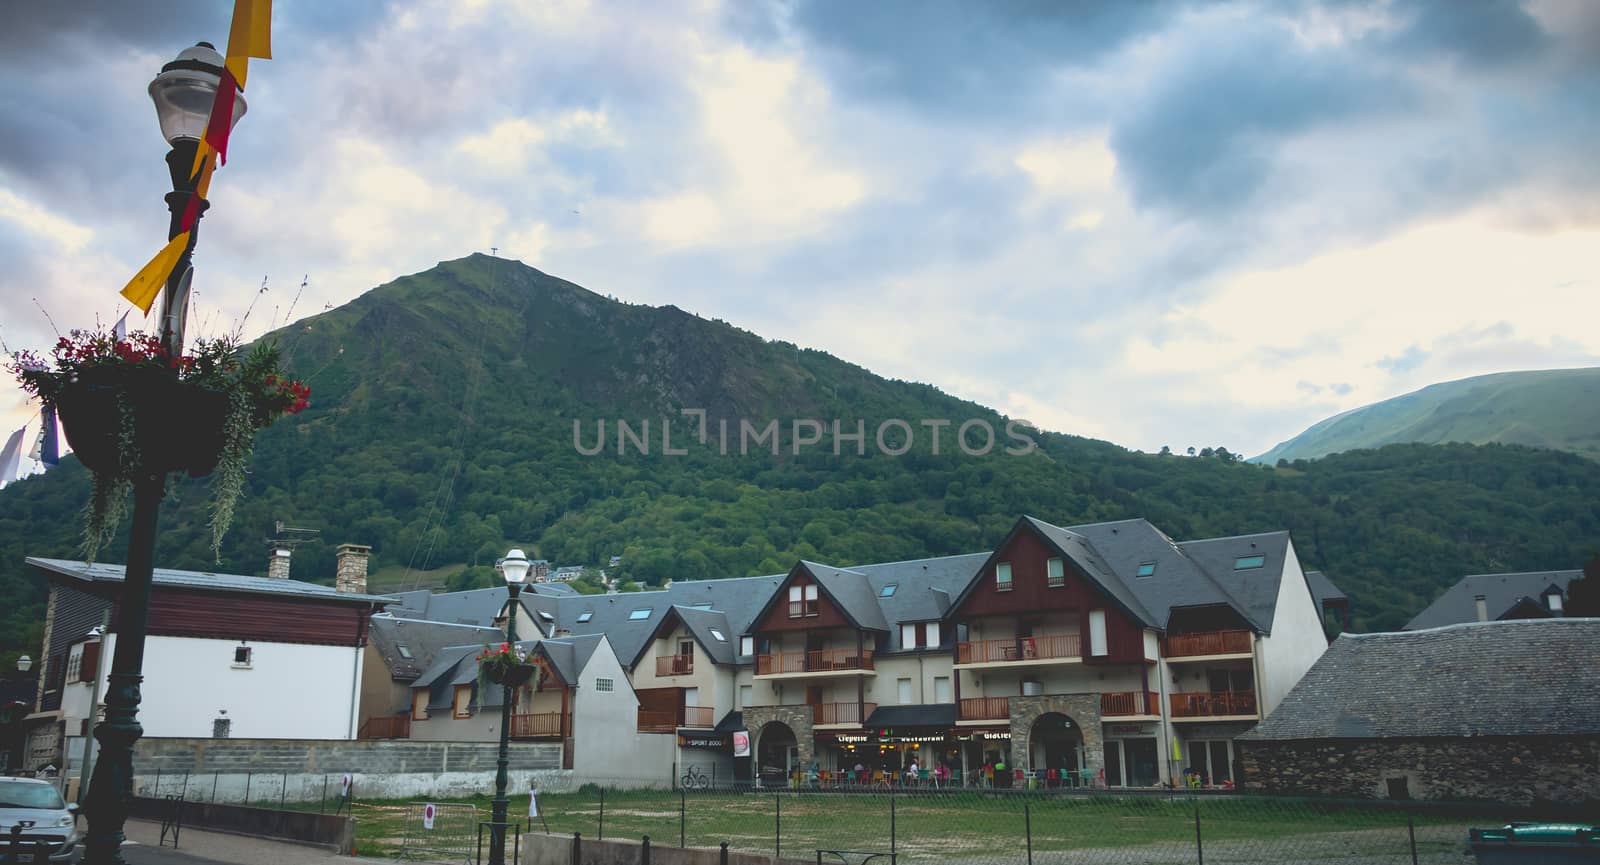 Saint-Lary-Soulan, France - August 20, 2018: atmosphere and architecture in the city center where people go for a walk on a summer day